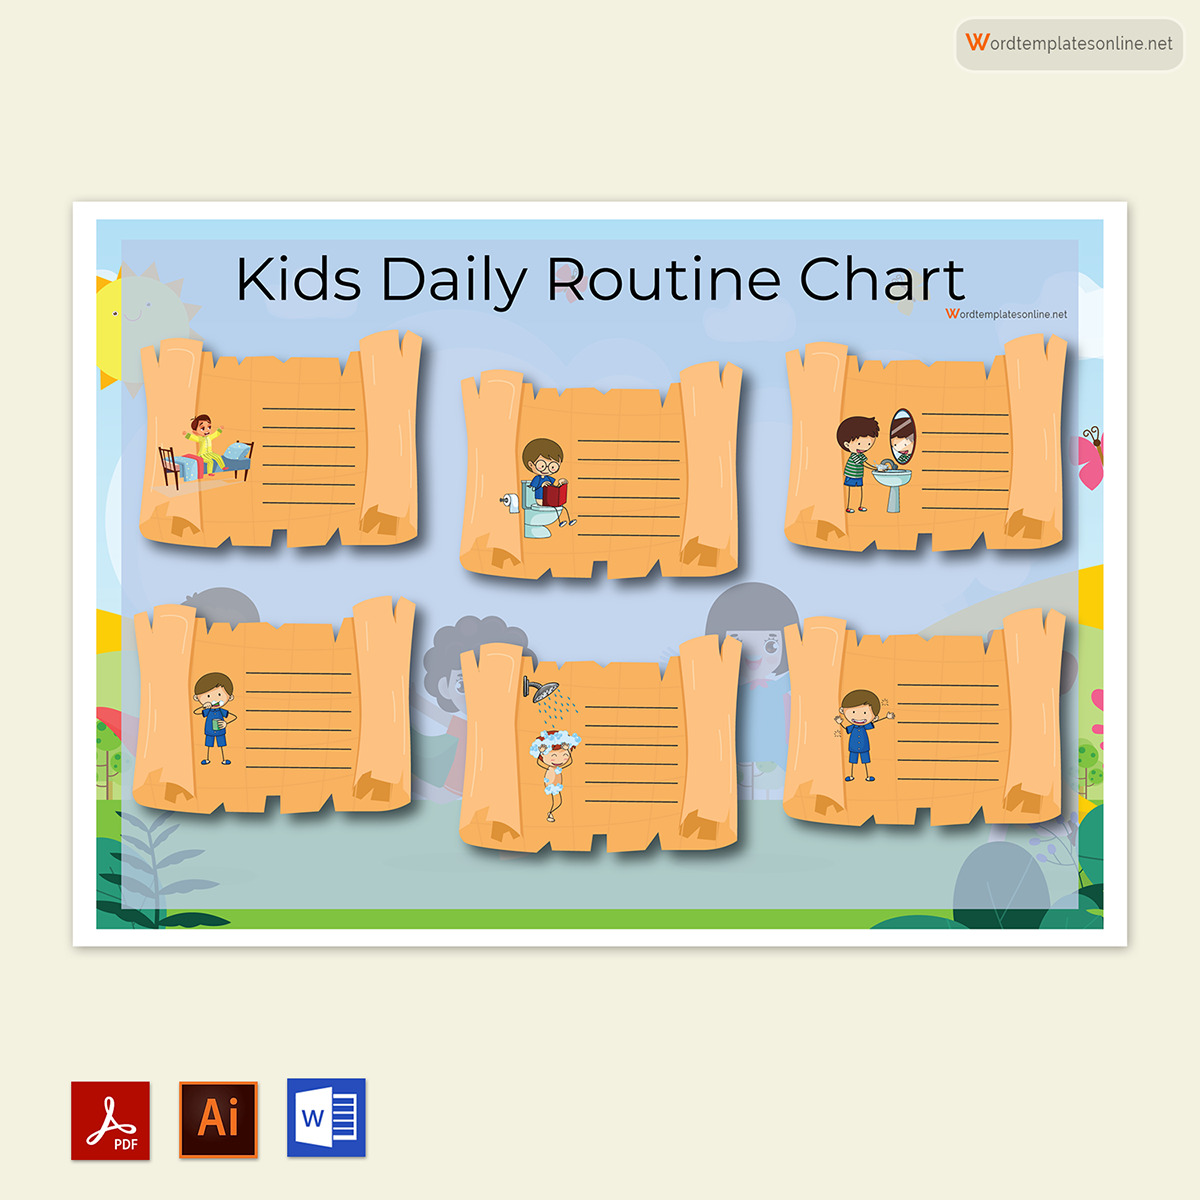 Great Downloadable Routine Coloring Chart for Kids Sample 02 as Adobe Illustrator and Document Format